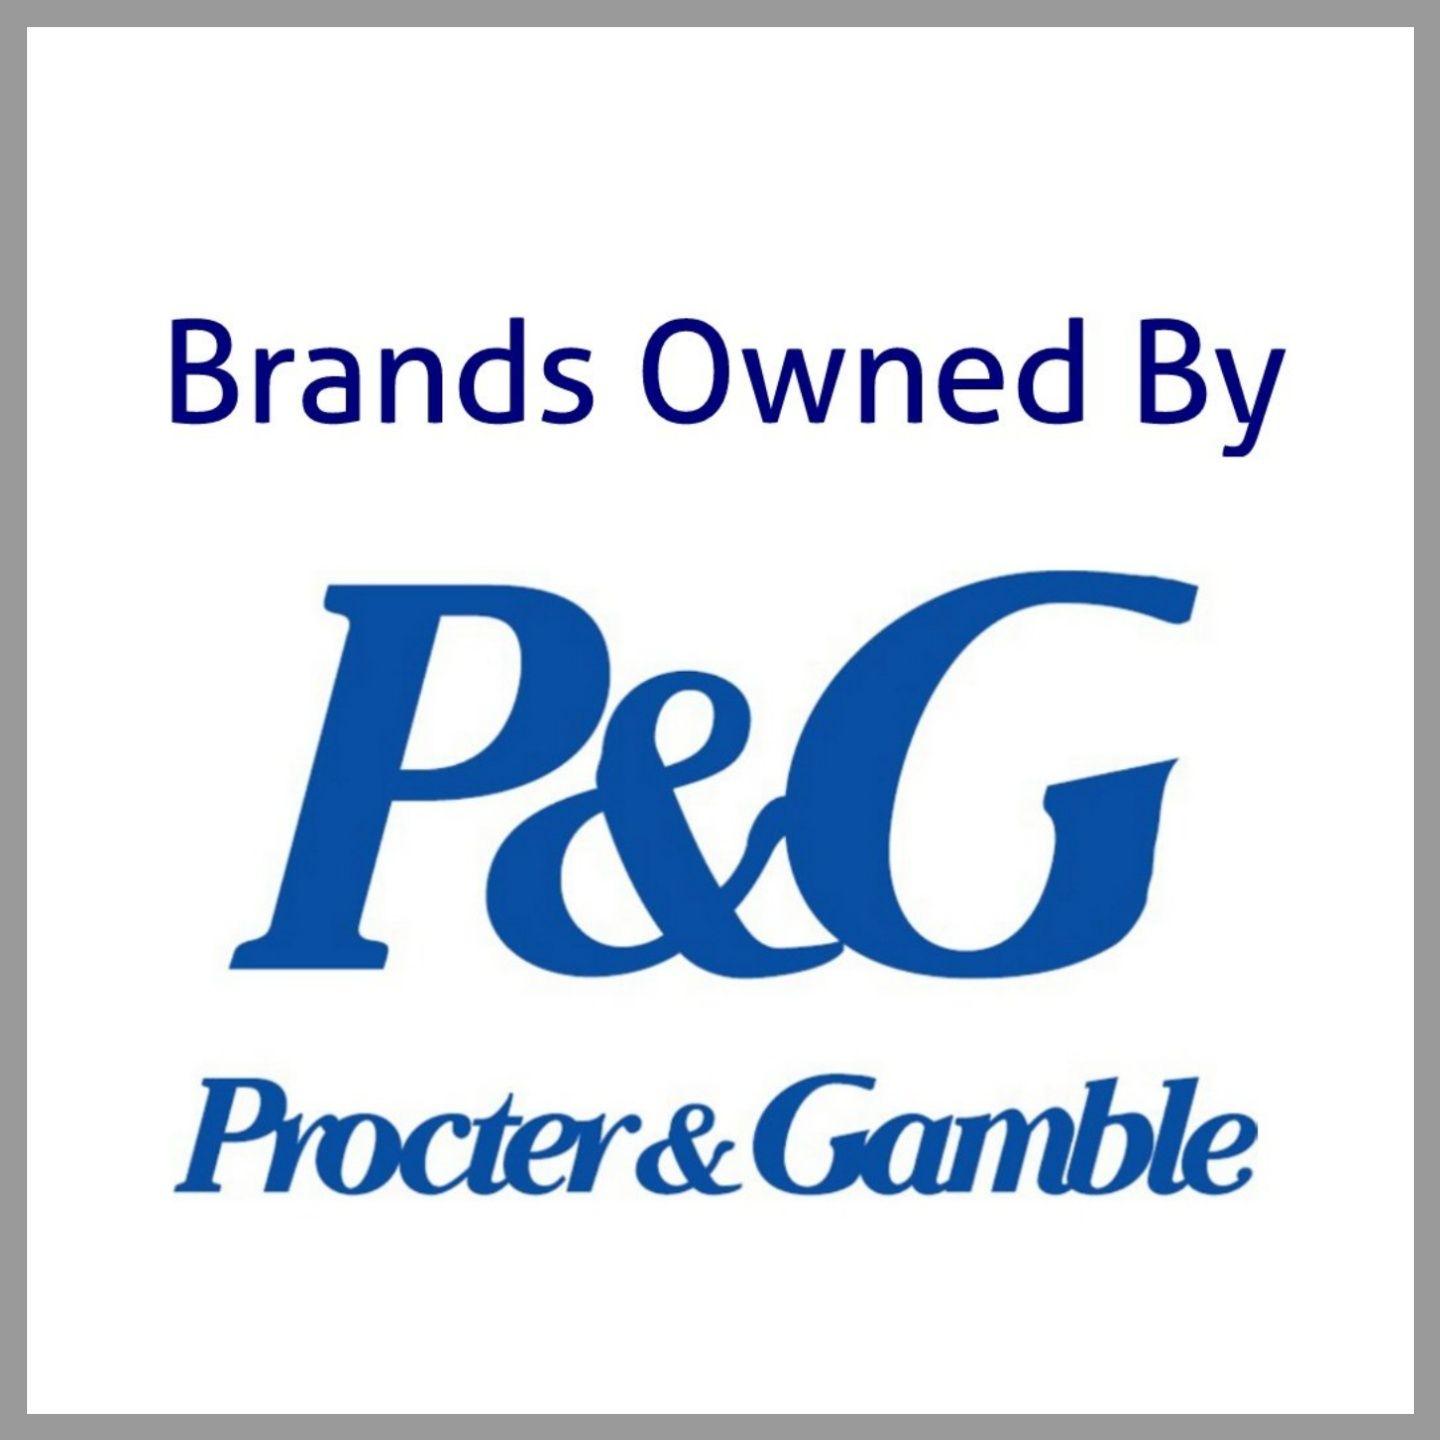 Procter and Gamble Brand Logo - Brands Owned By Proctor And Gamble 2018 Cruelty Free